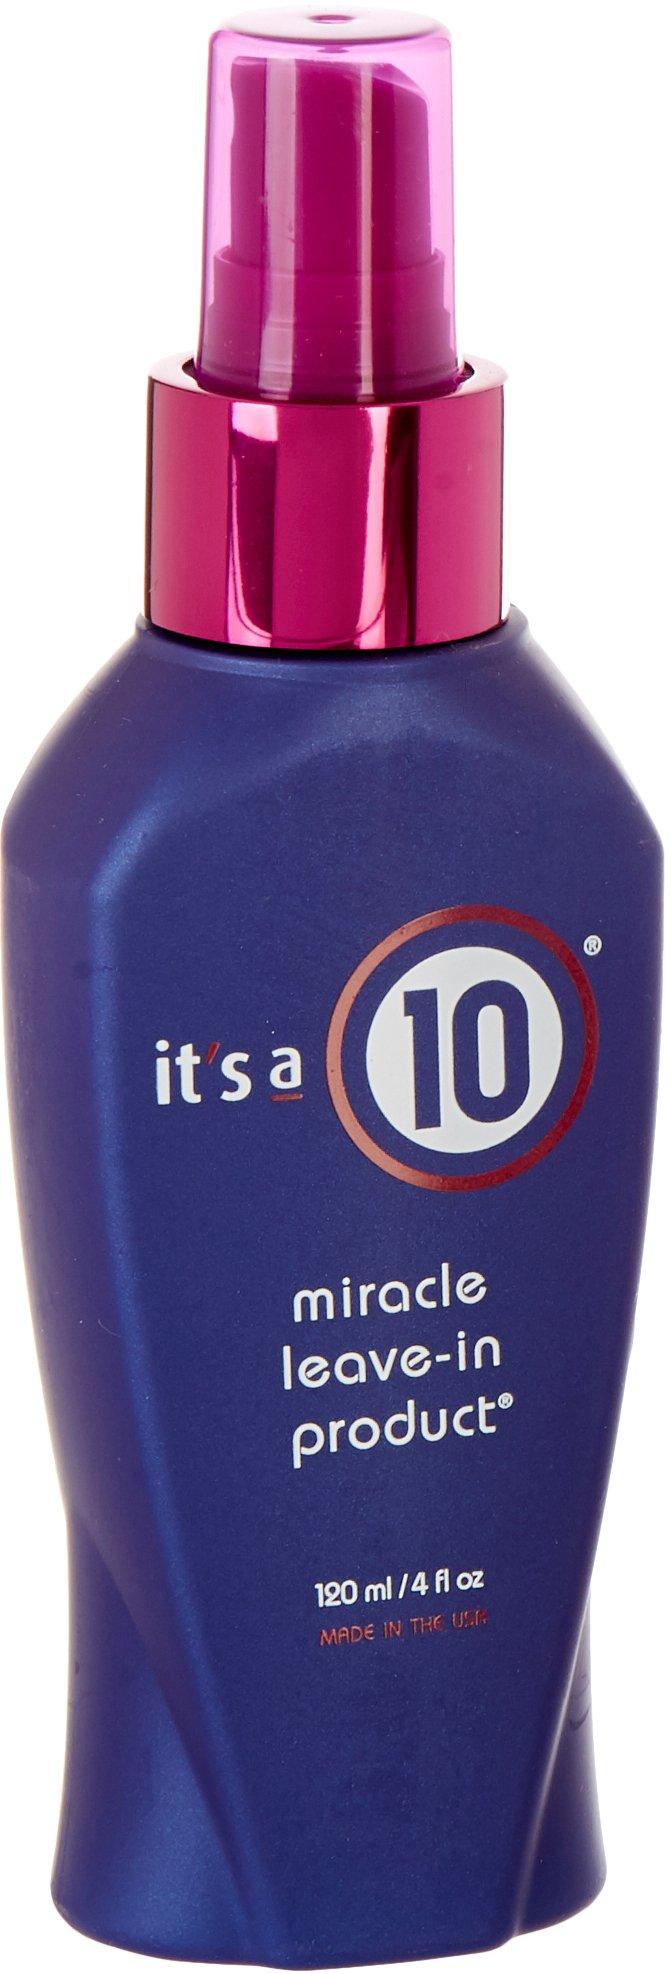 4 oz. Miracle Leave-In Treatment